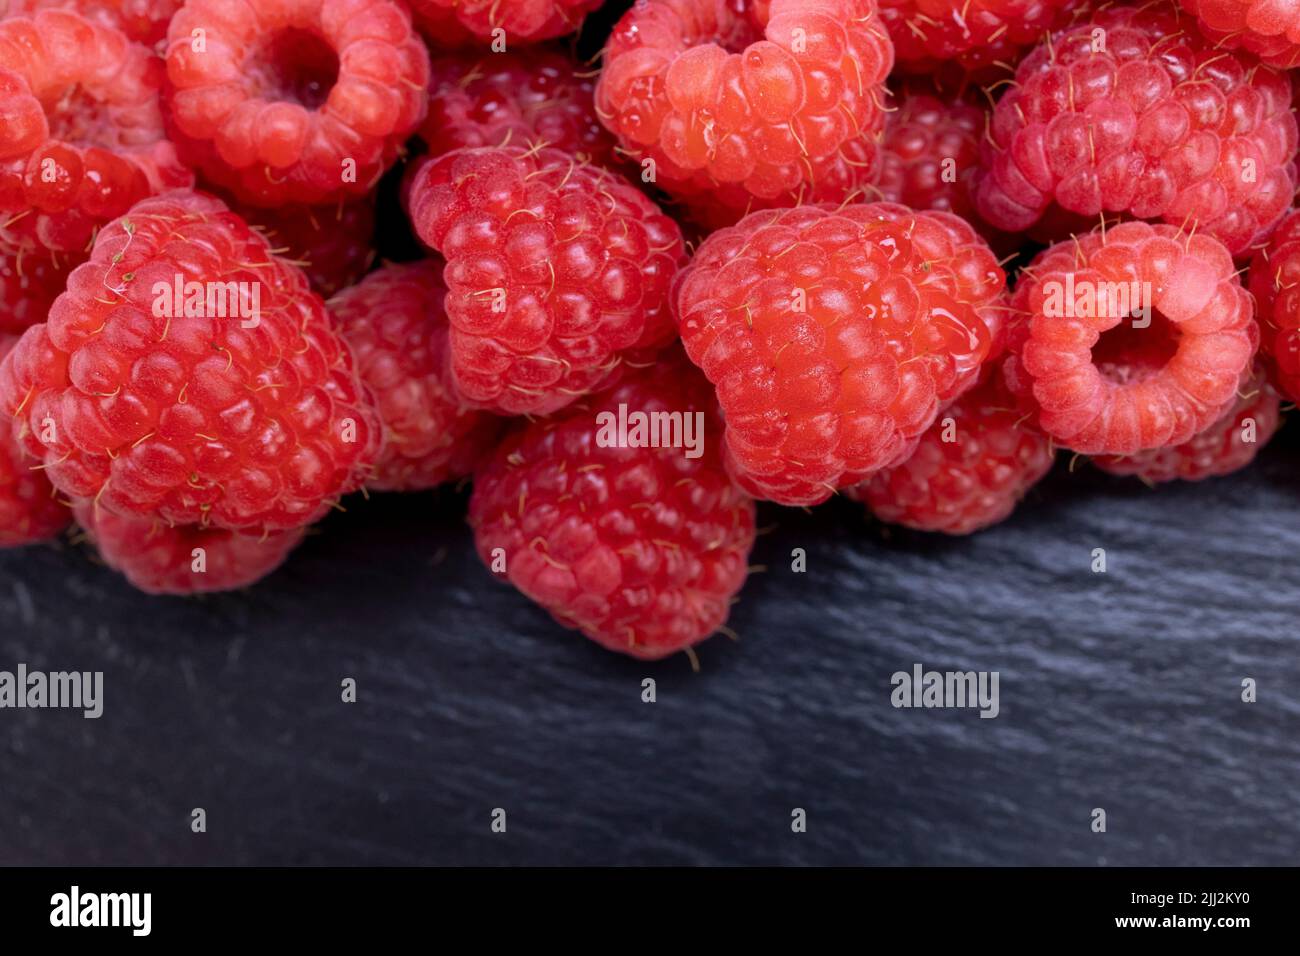 Fresh raspberry summer juicy fruits for a healthy diet. Organic raspberries for a healthy food and life concept. Stock Photo